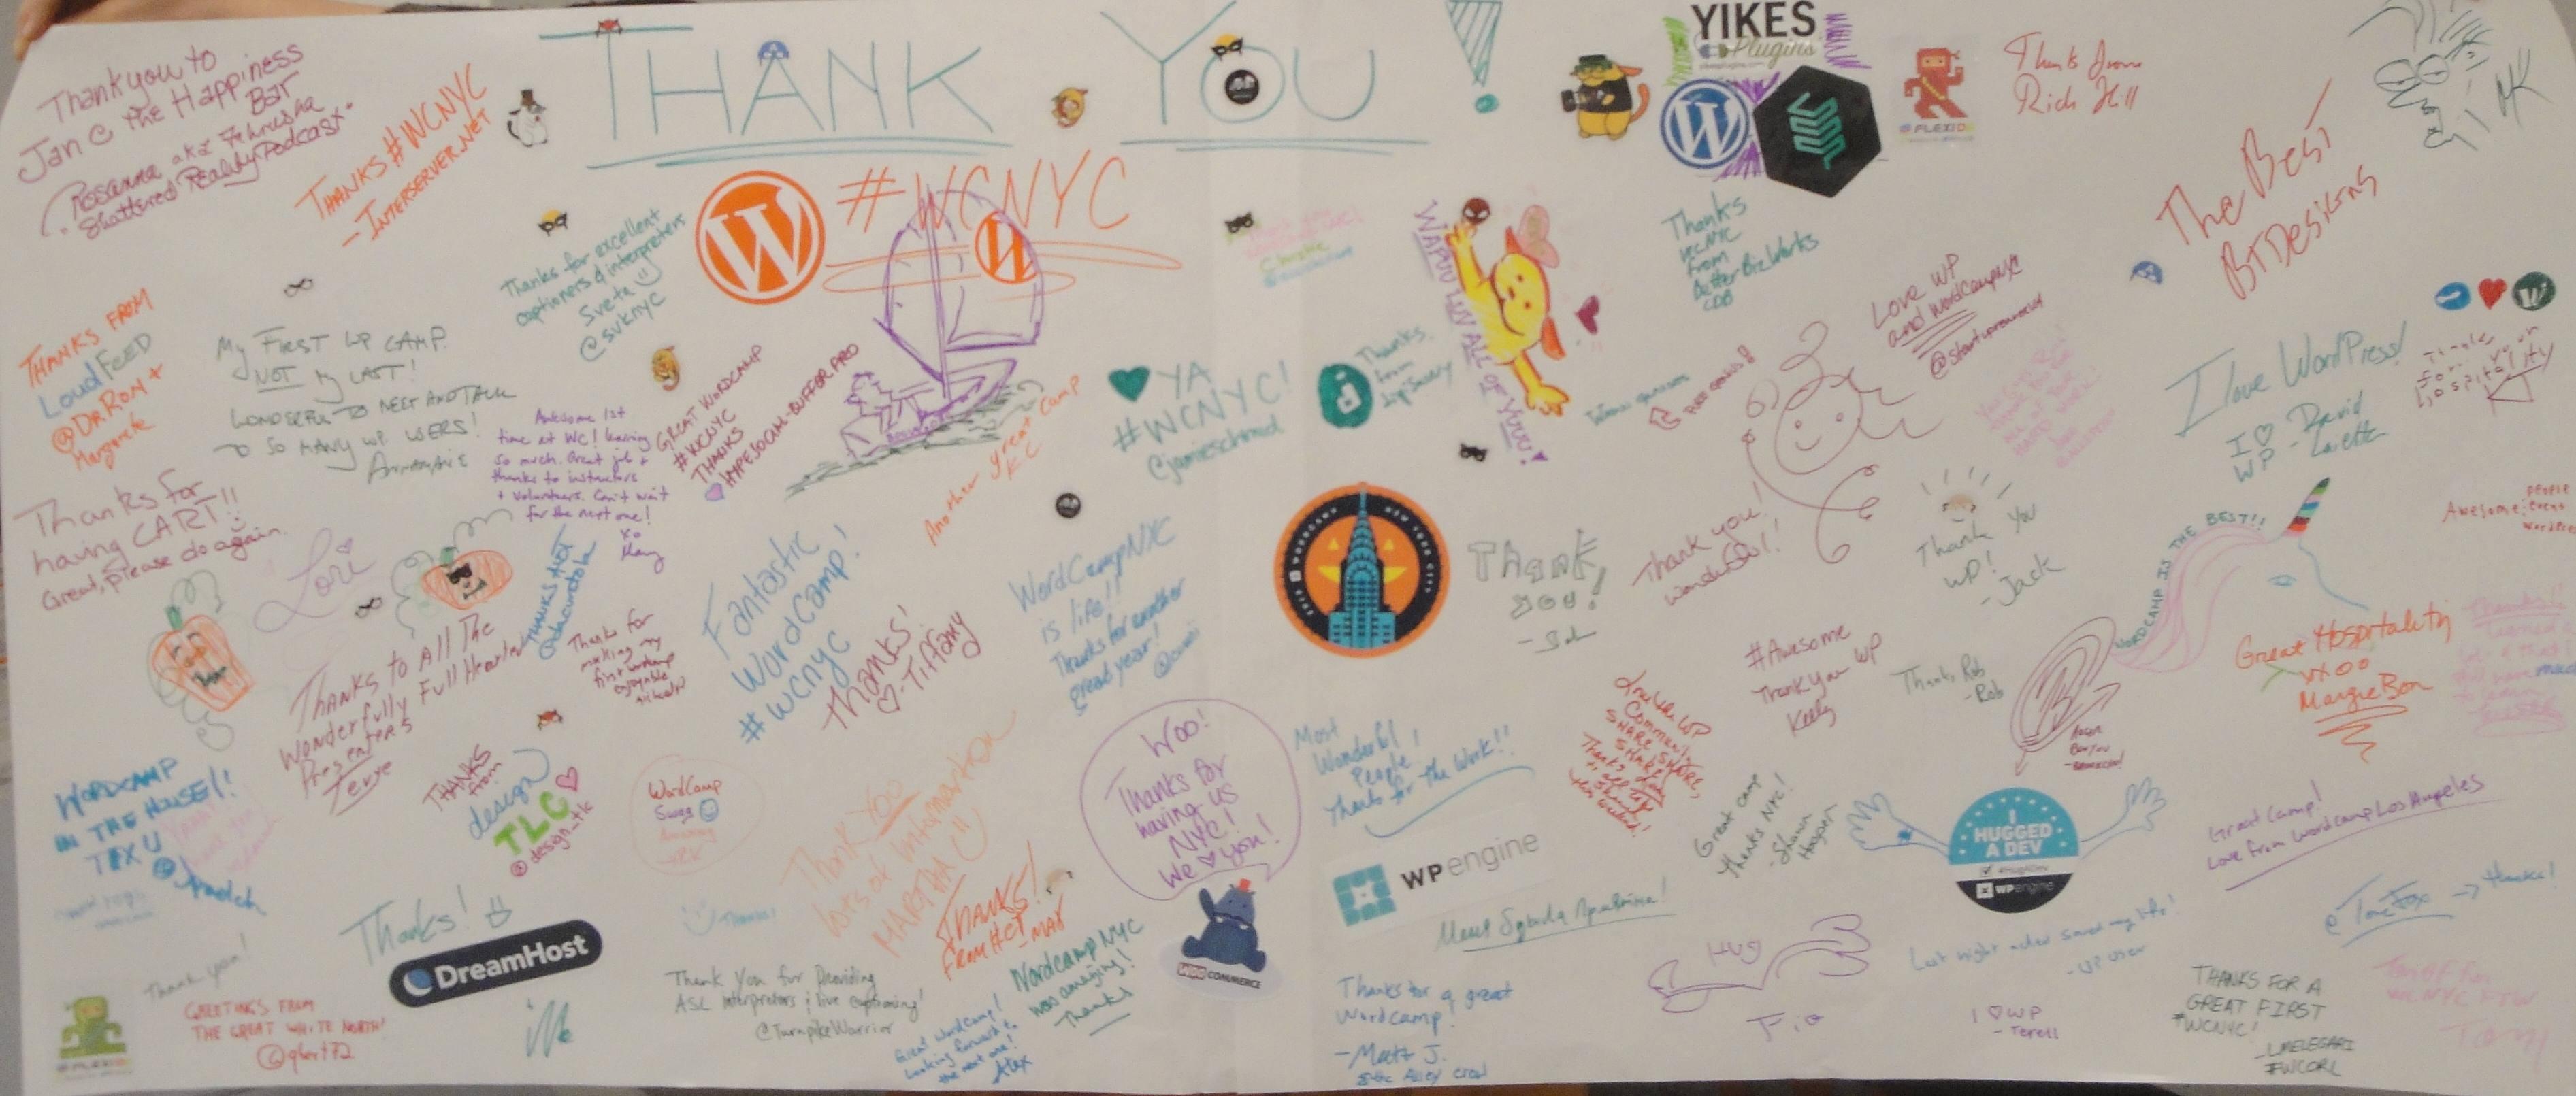 thank-you-wcnyc-sign